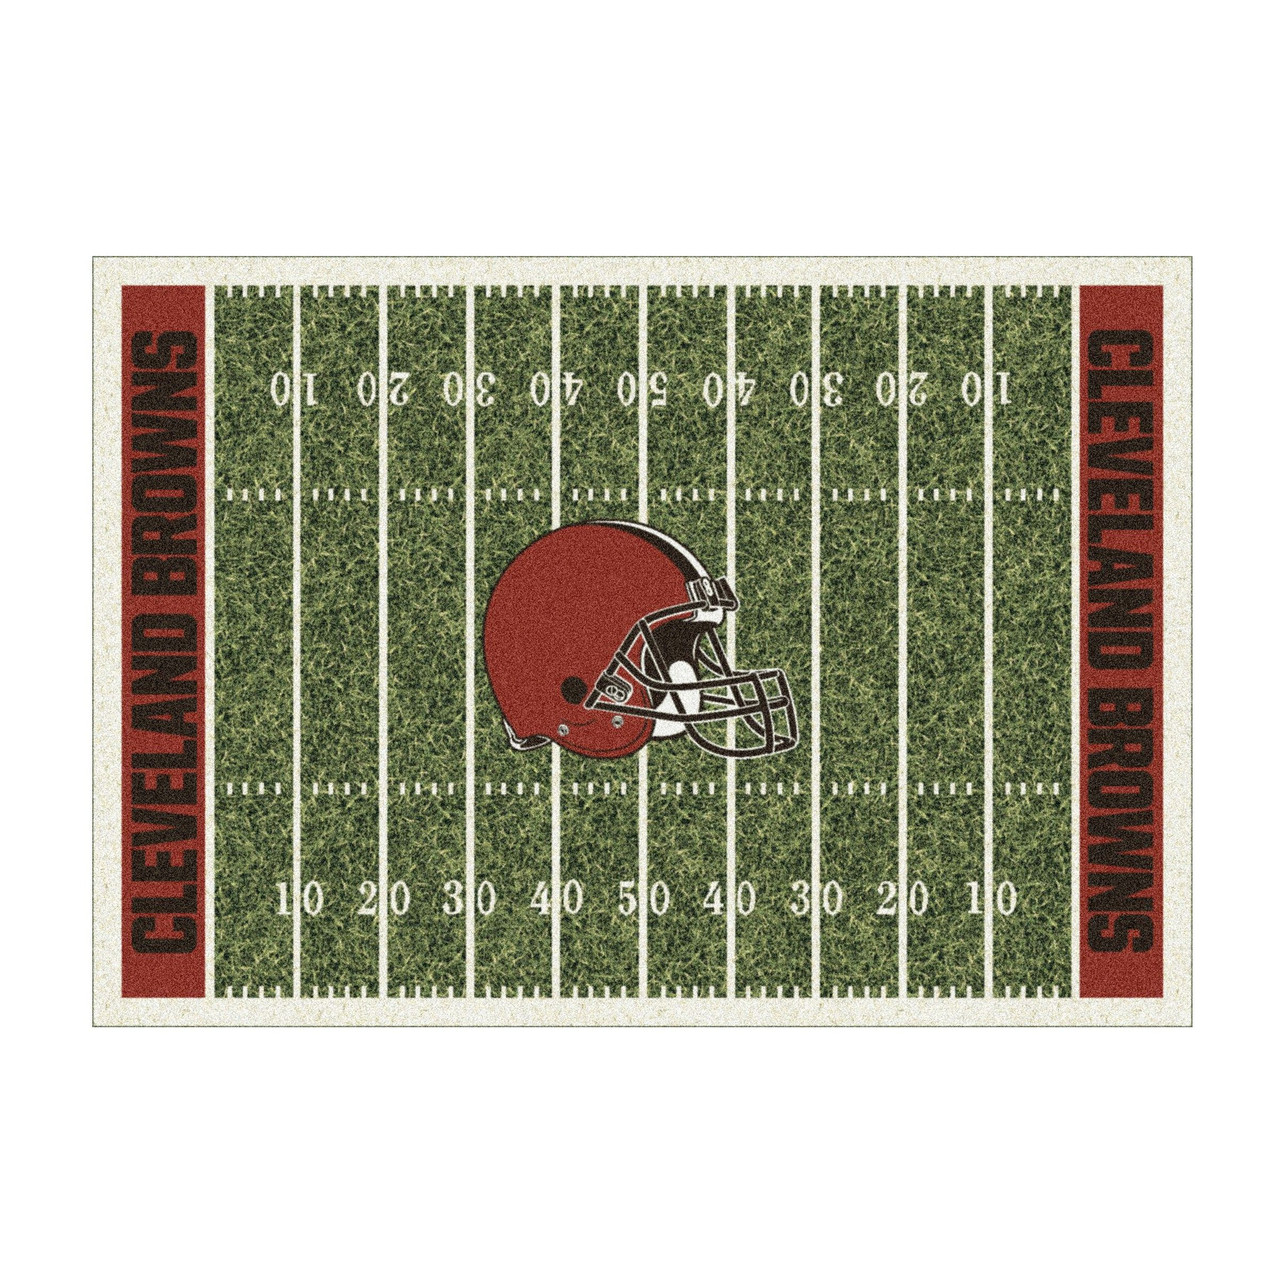 520-5020, Cleveland, Browns, CLE, 4'x6', Homefield, Rug, Stainmaster. NFL, Imperial, 015961413585